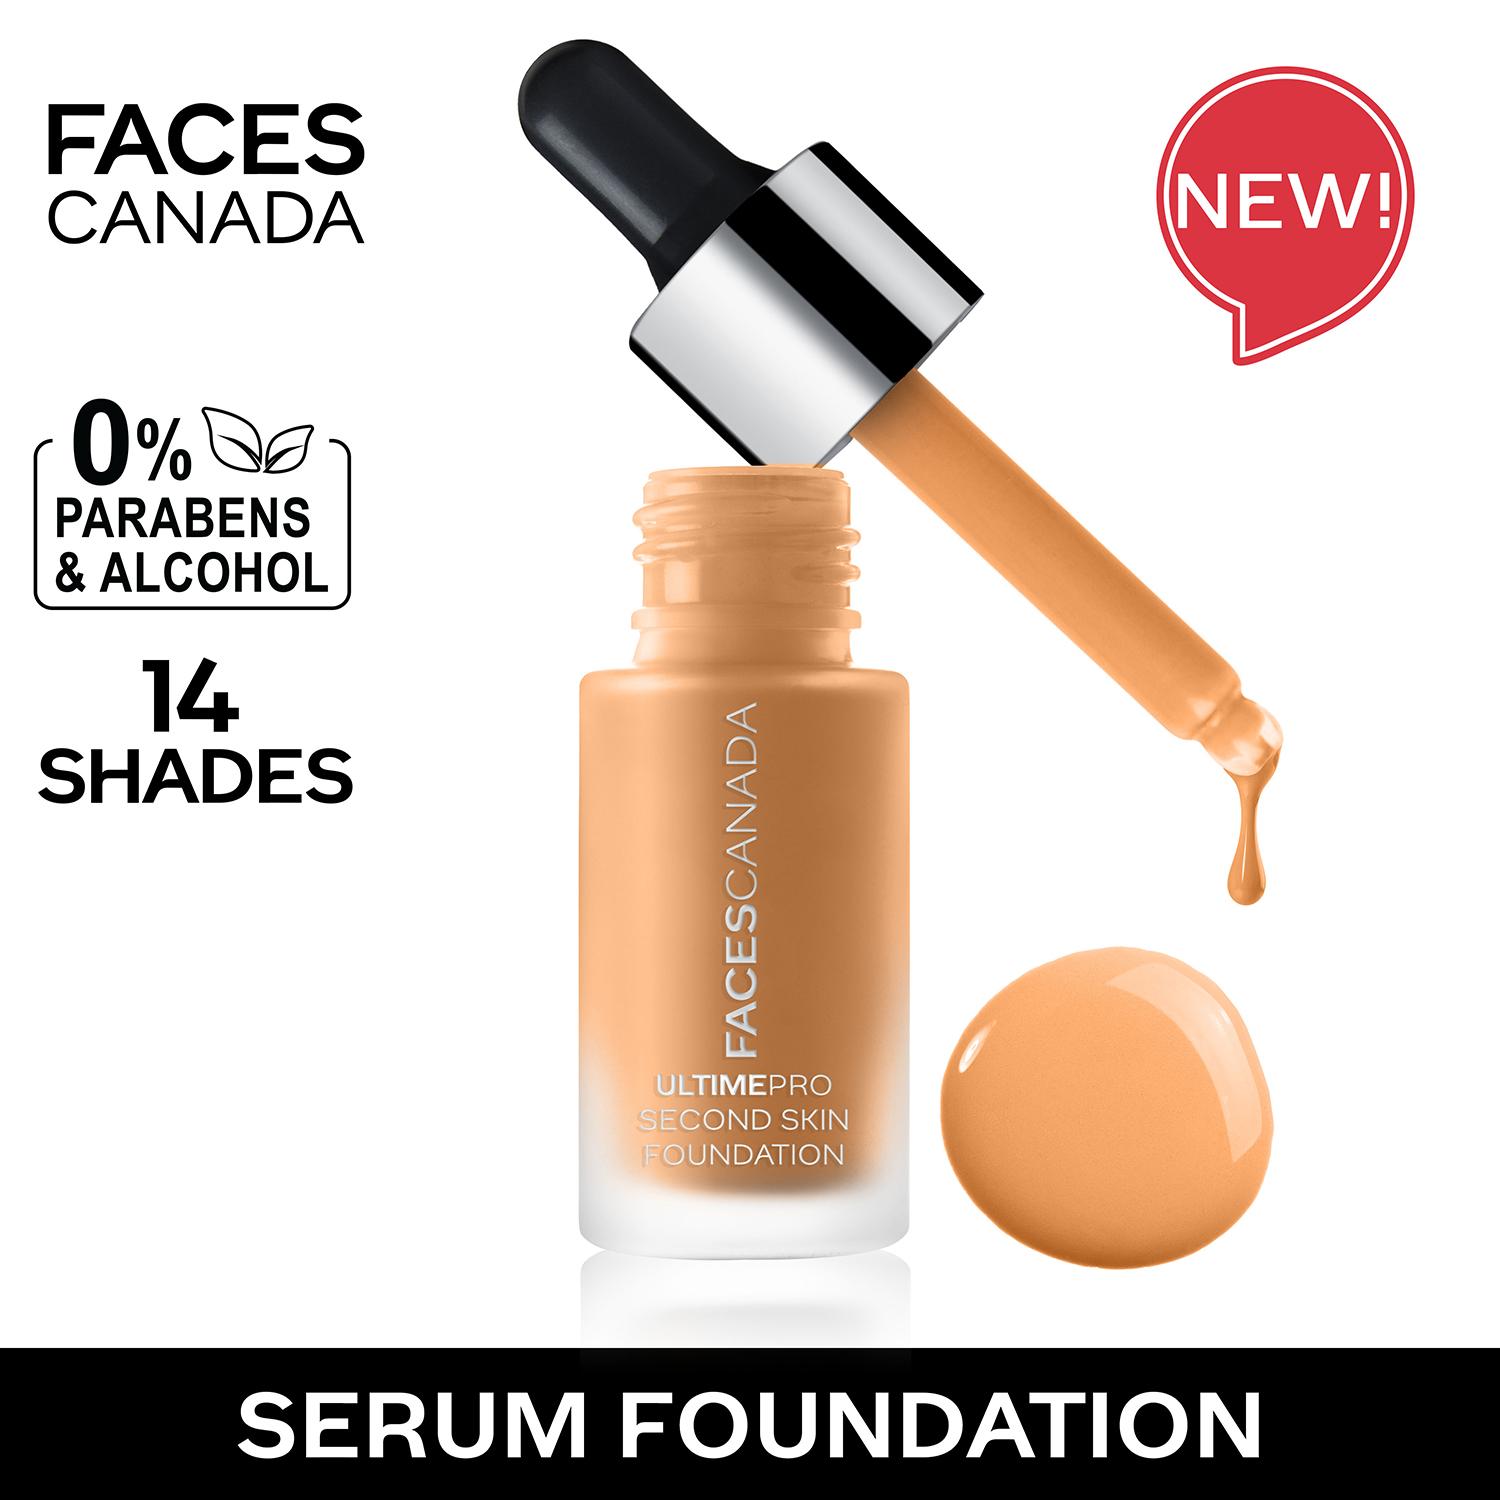 Faces Canada | Faces Canada Ultime Pro Second Skin Foundation - Natural 02, Matte Finish, SPF 15 (15 ml)